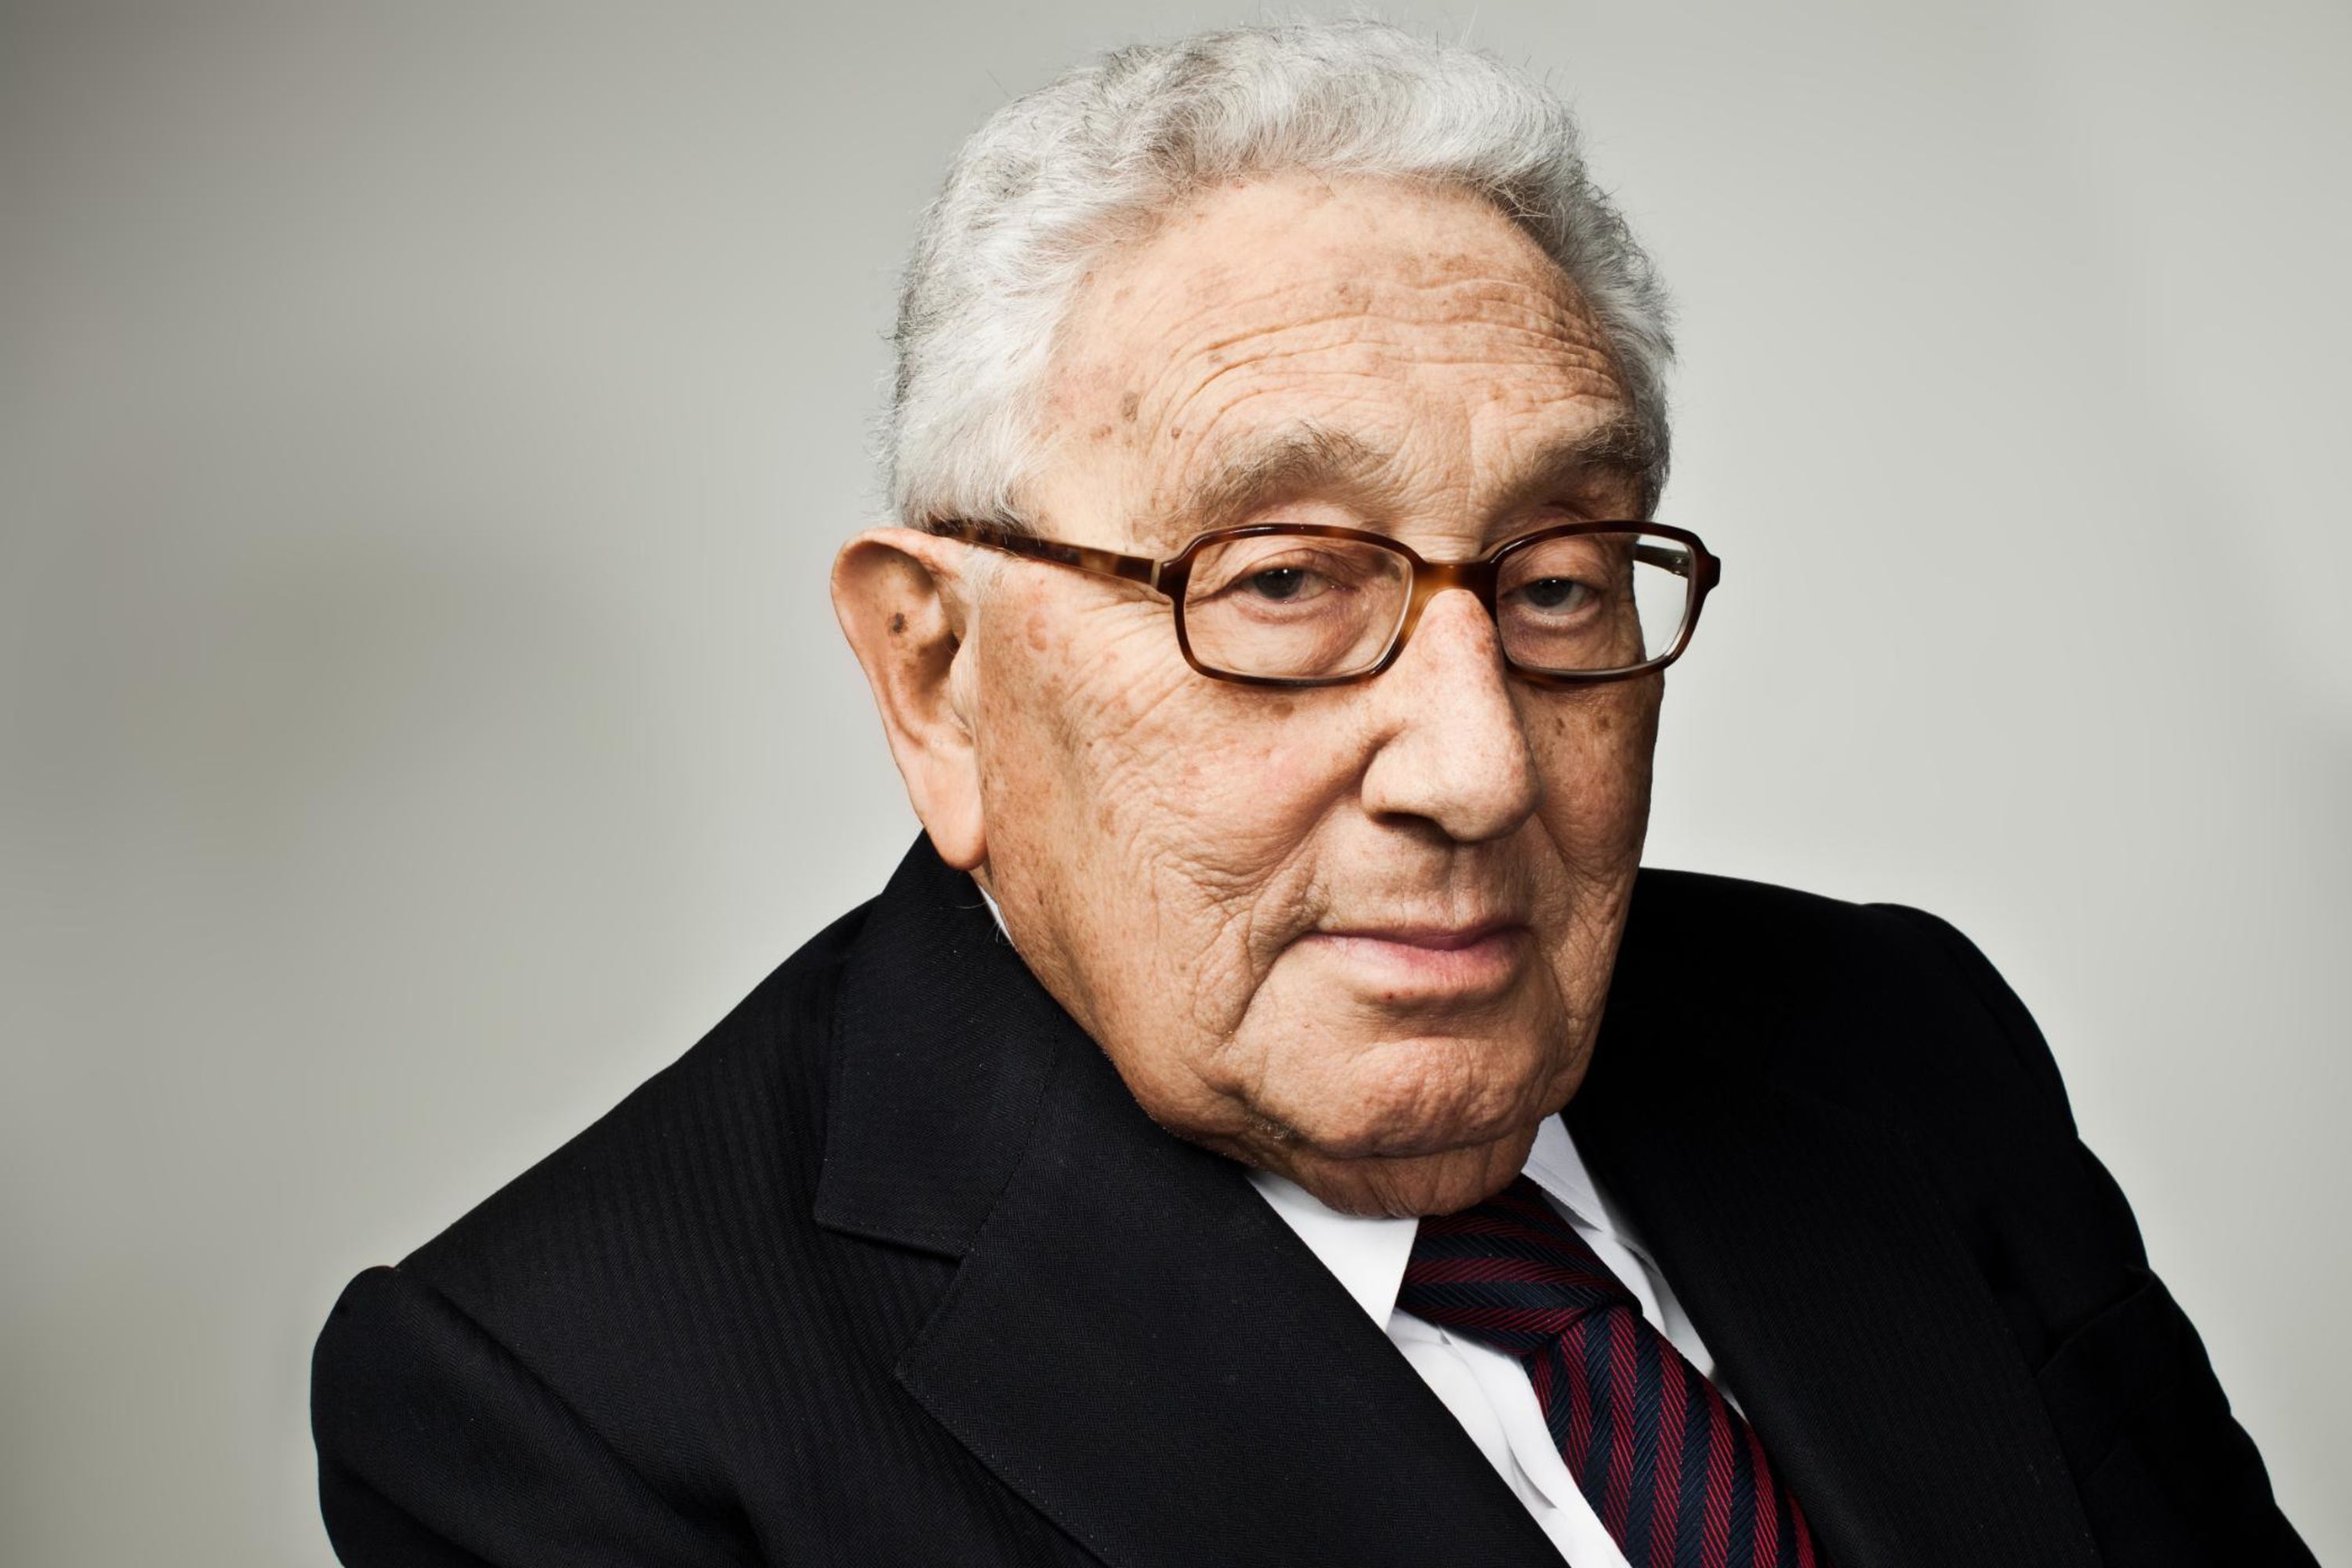 Former US Secretary of State Henry Kissinger poses for a portrait in Washington, DC, in 2011.